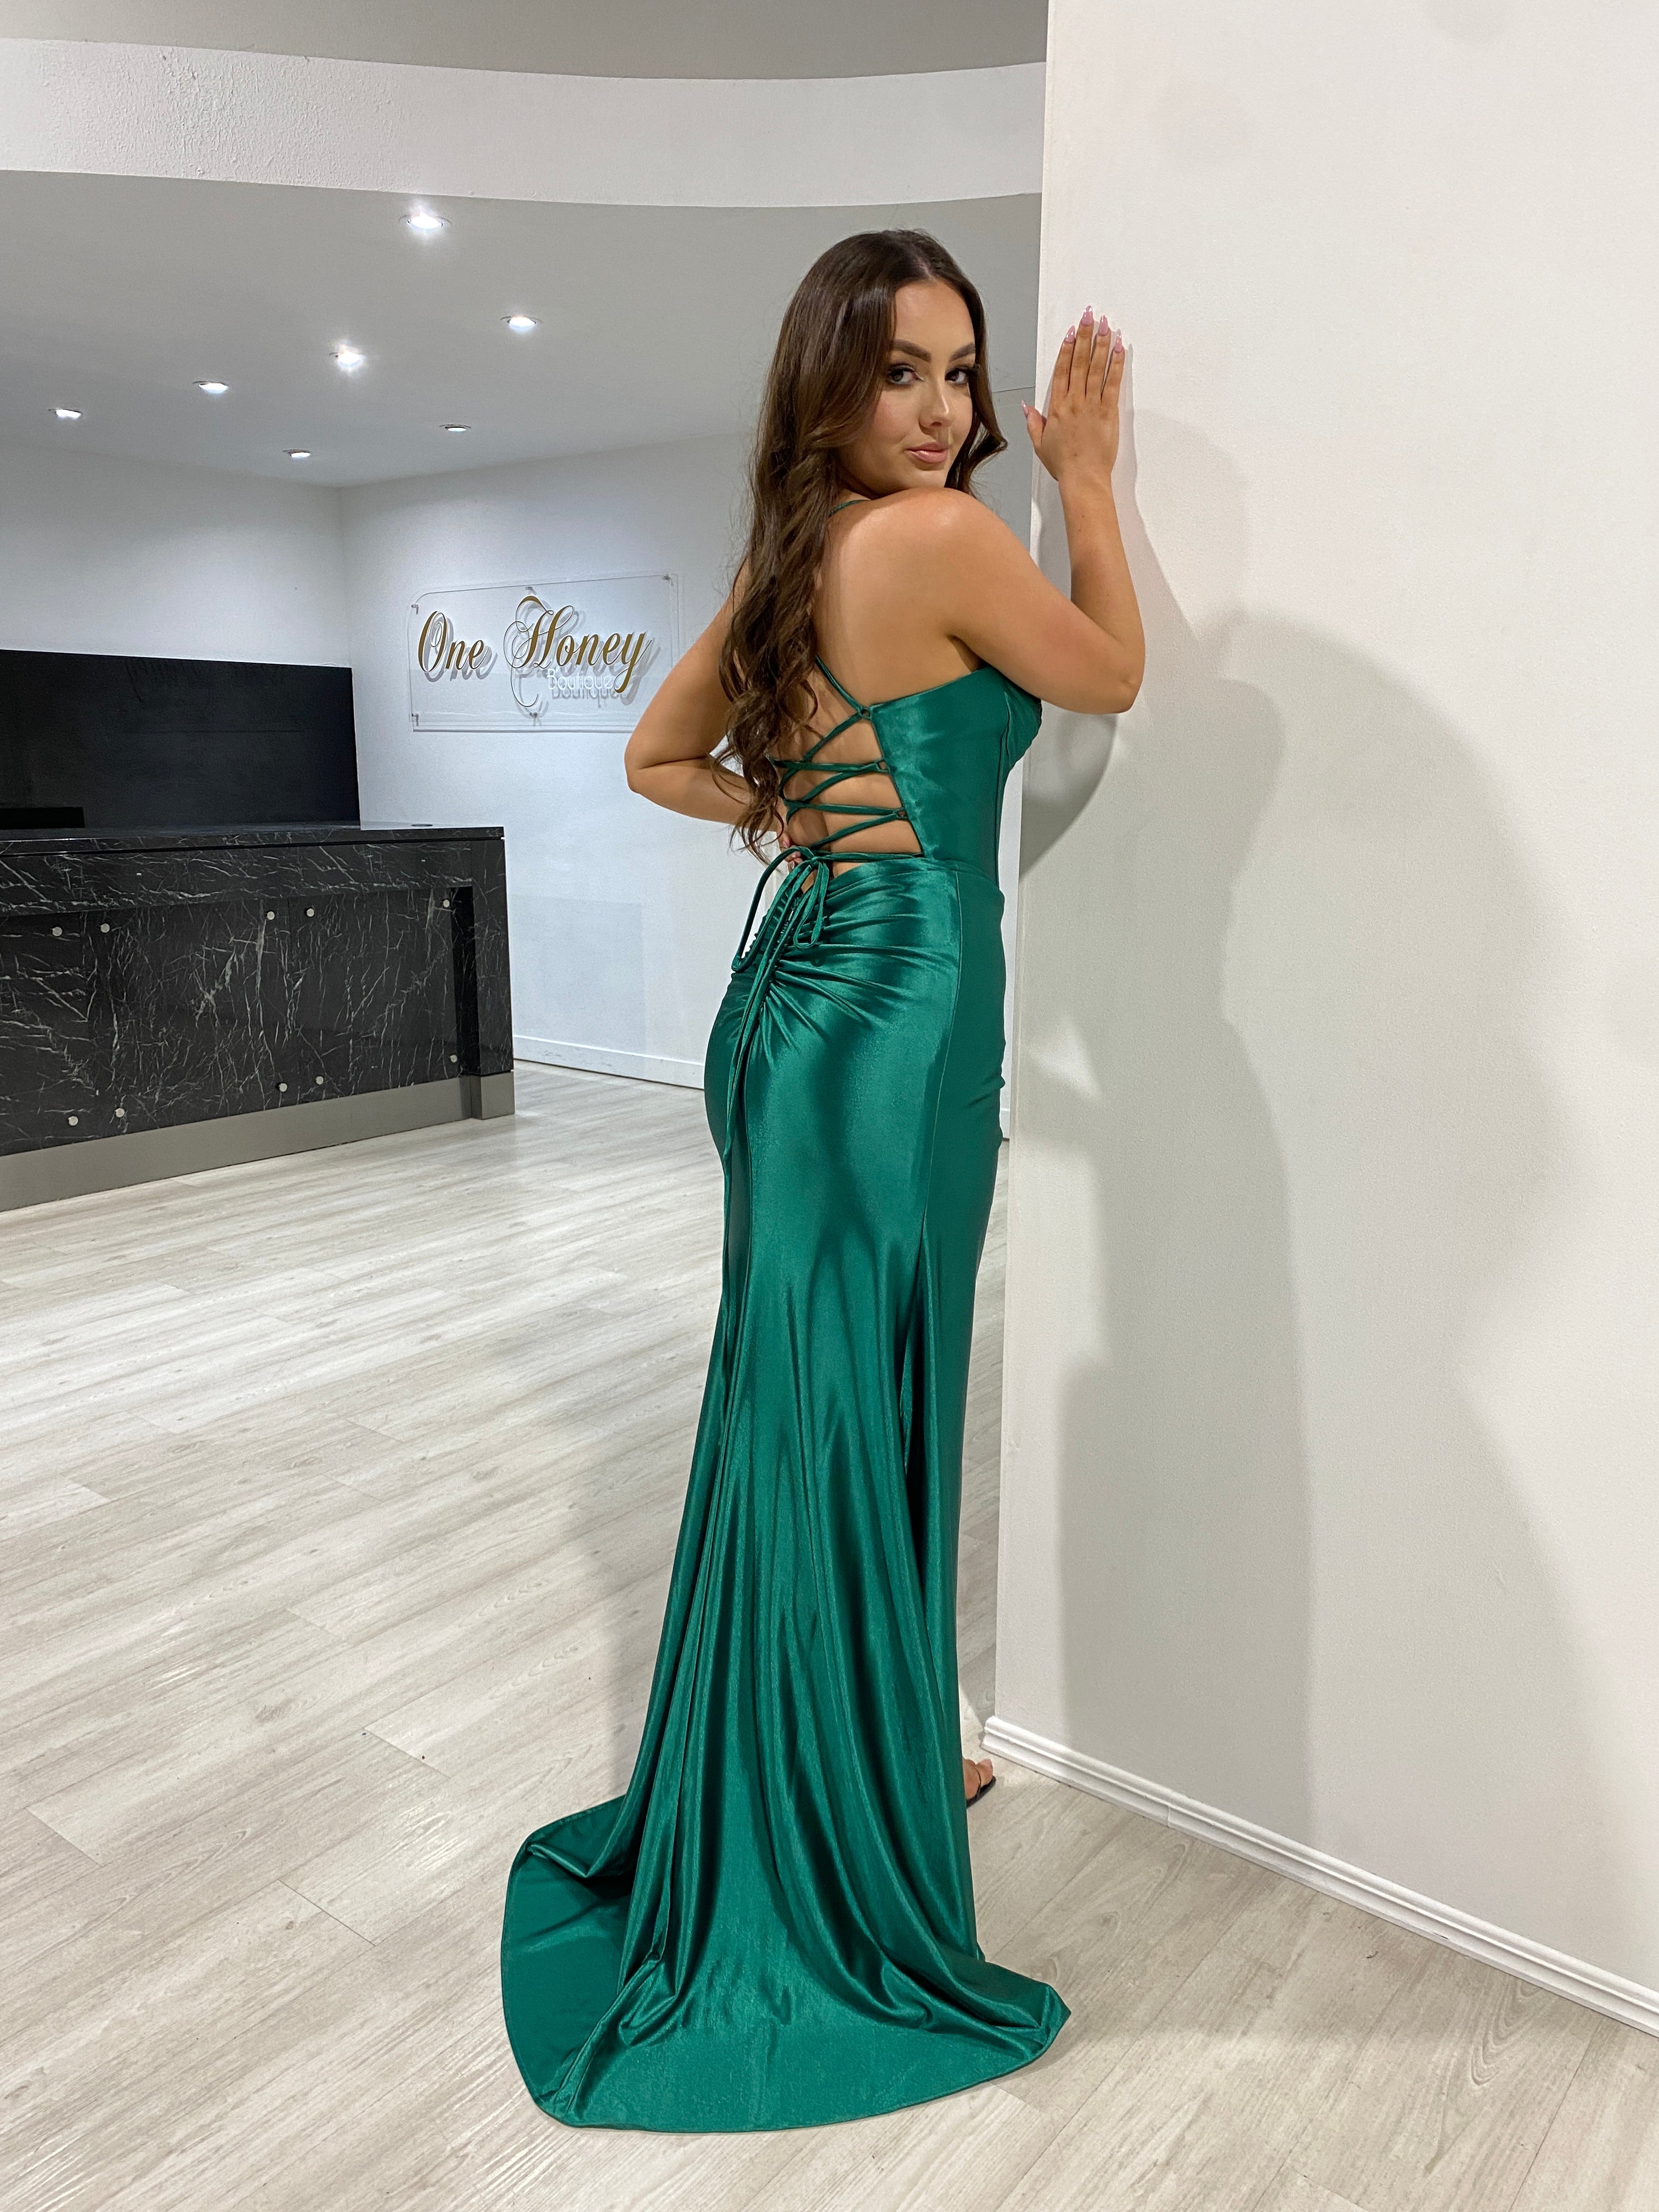 Honey Couture RAFAELLA Emerald Crystal Diamante Bustier Corset Lace Up Back Silky Mermaid Formal Dress (RED TAG FINAL SALE)